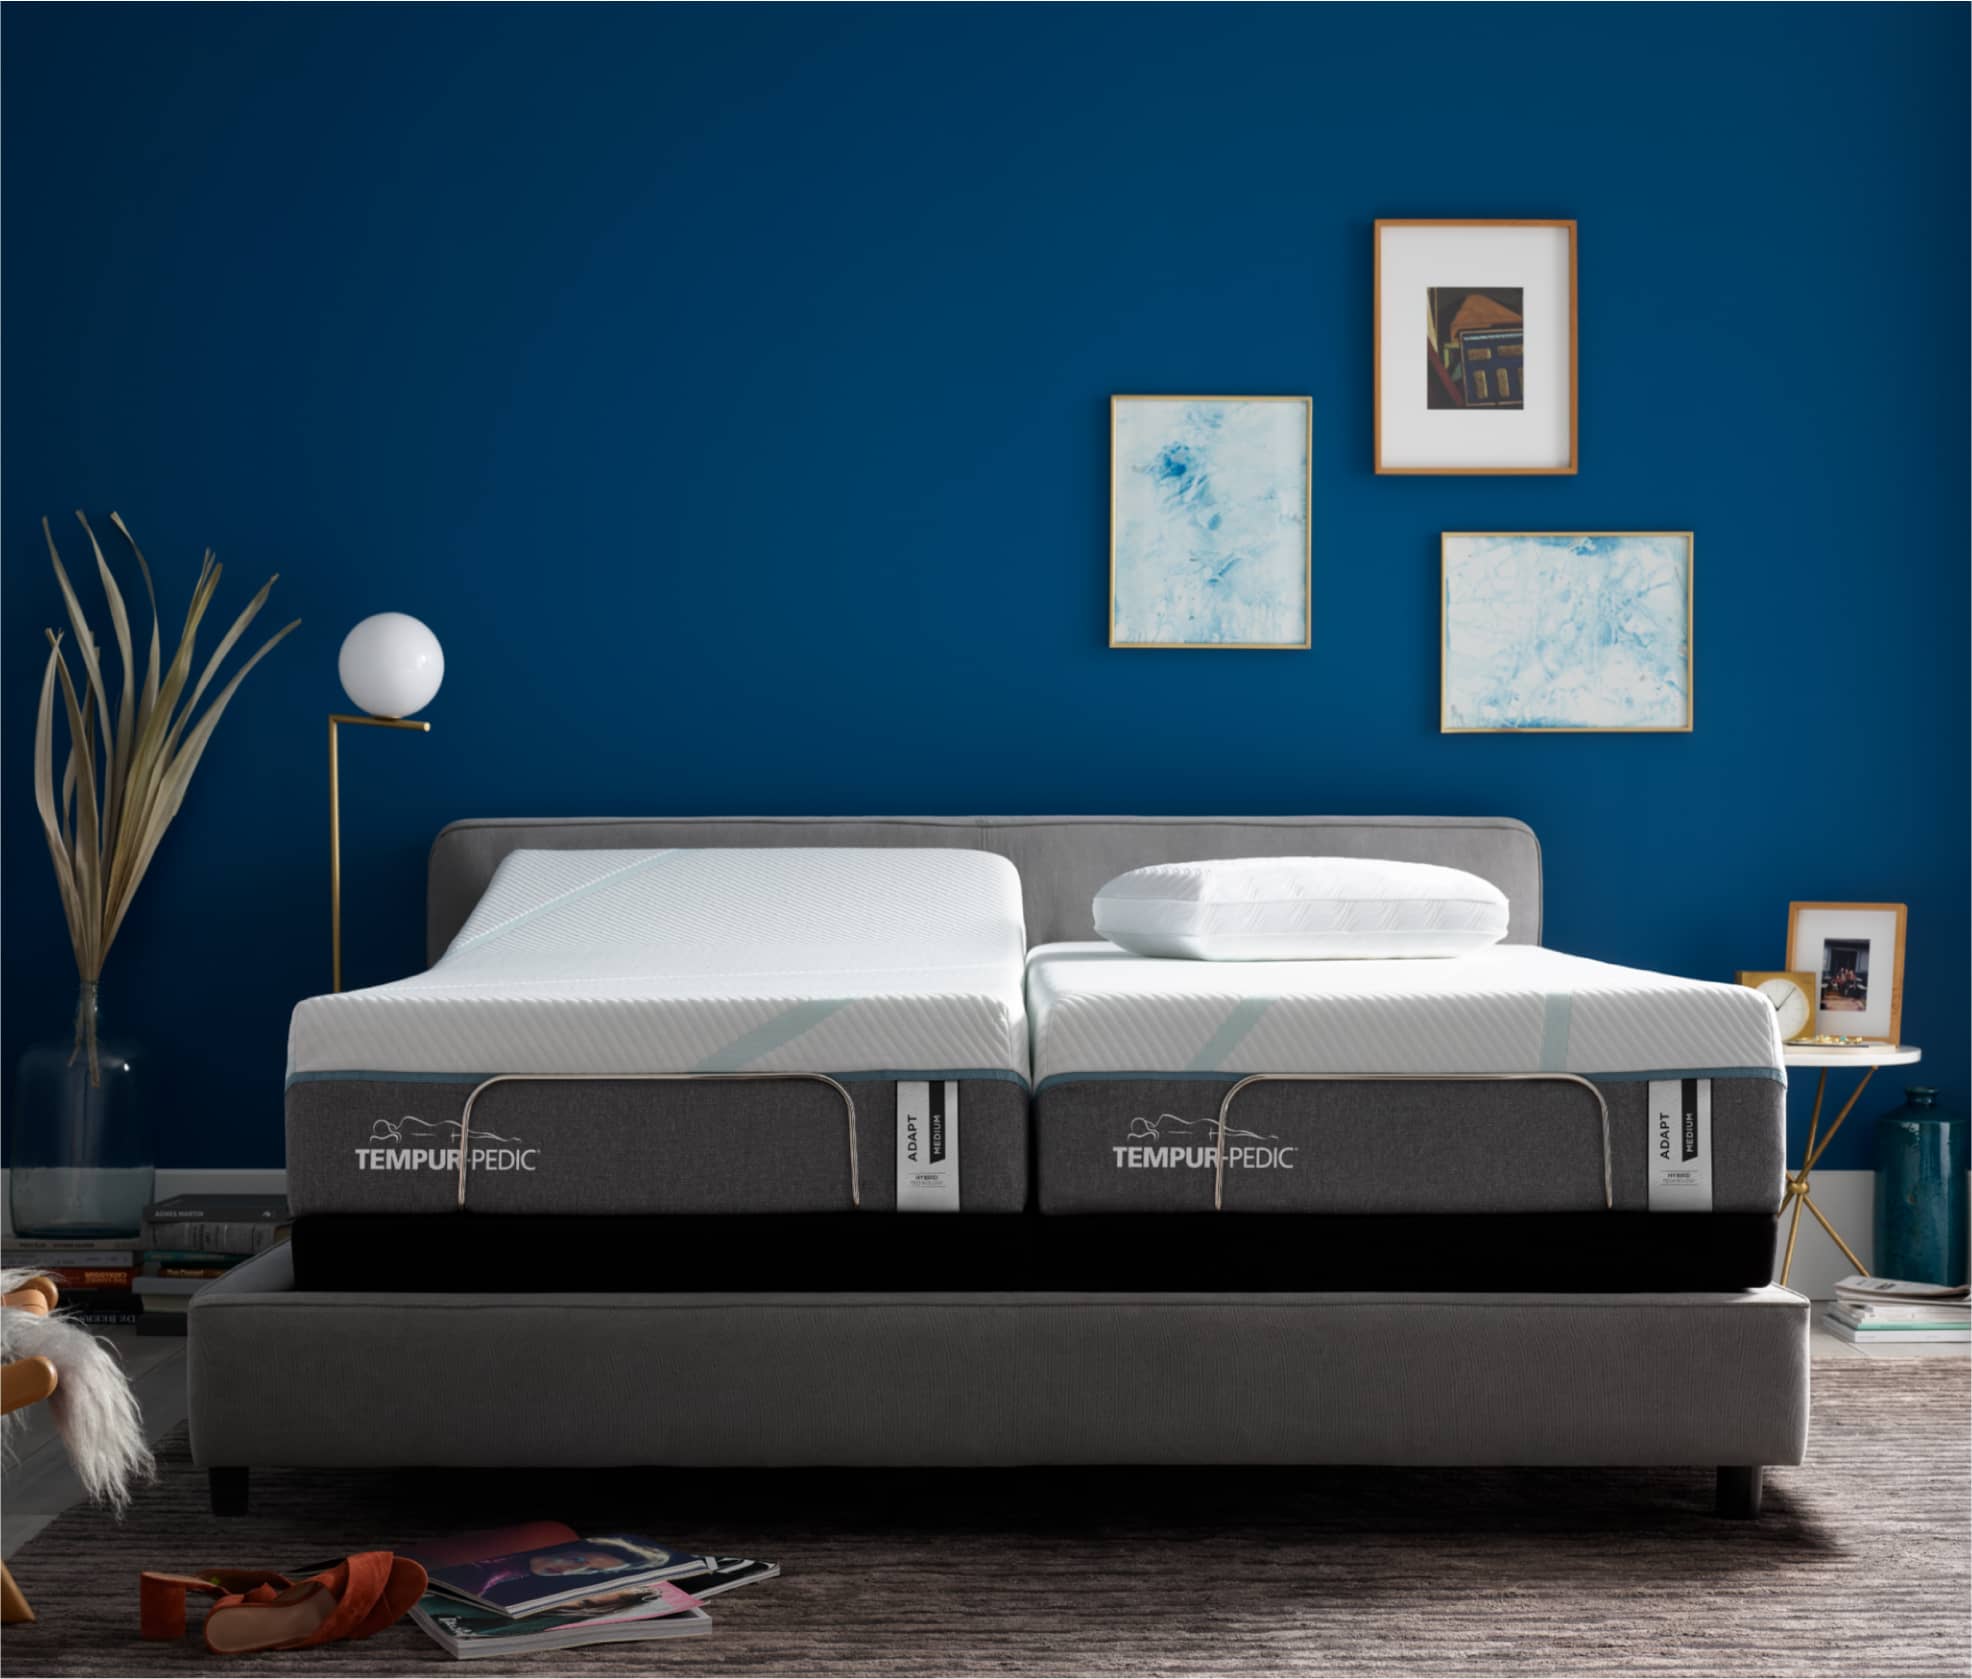 Two Tempur-Pedic Twin Mattresses sit on a king size gray upholstered bed frame, one of the mattresses is slightly elevated showing that the two mattresses can elevate independently. The bed is against a dark blue wall with three pieces of art work hung on the wall toward the right side of the bed.